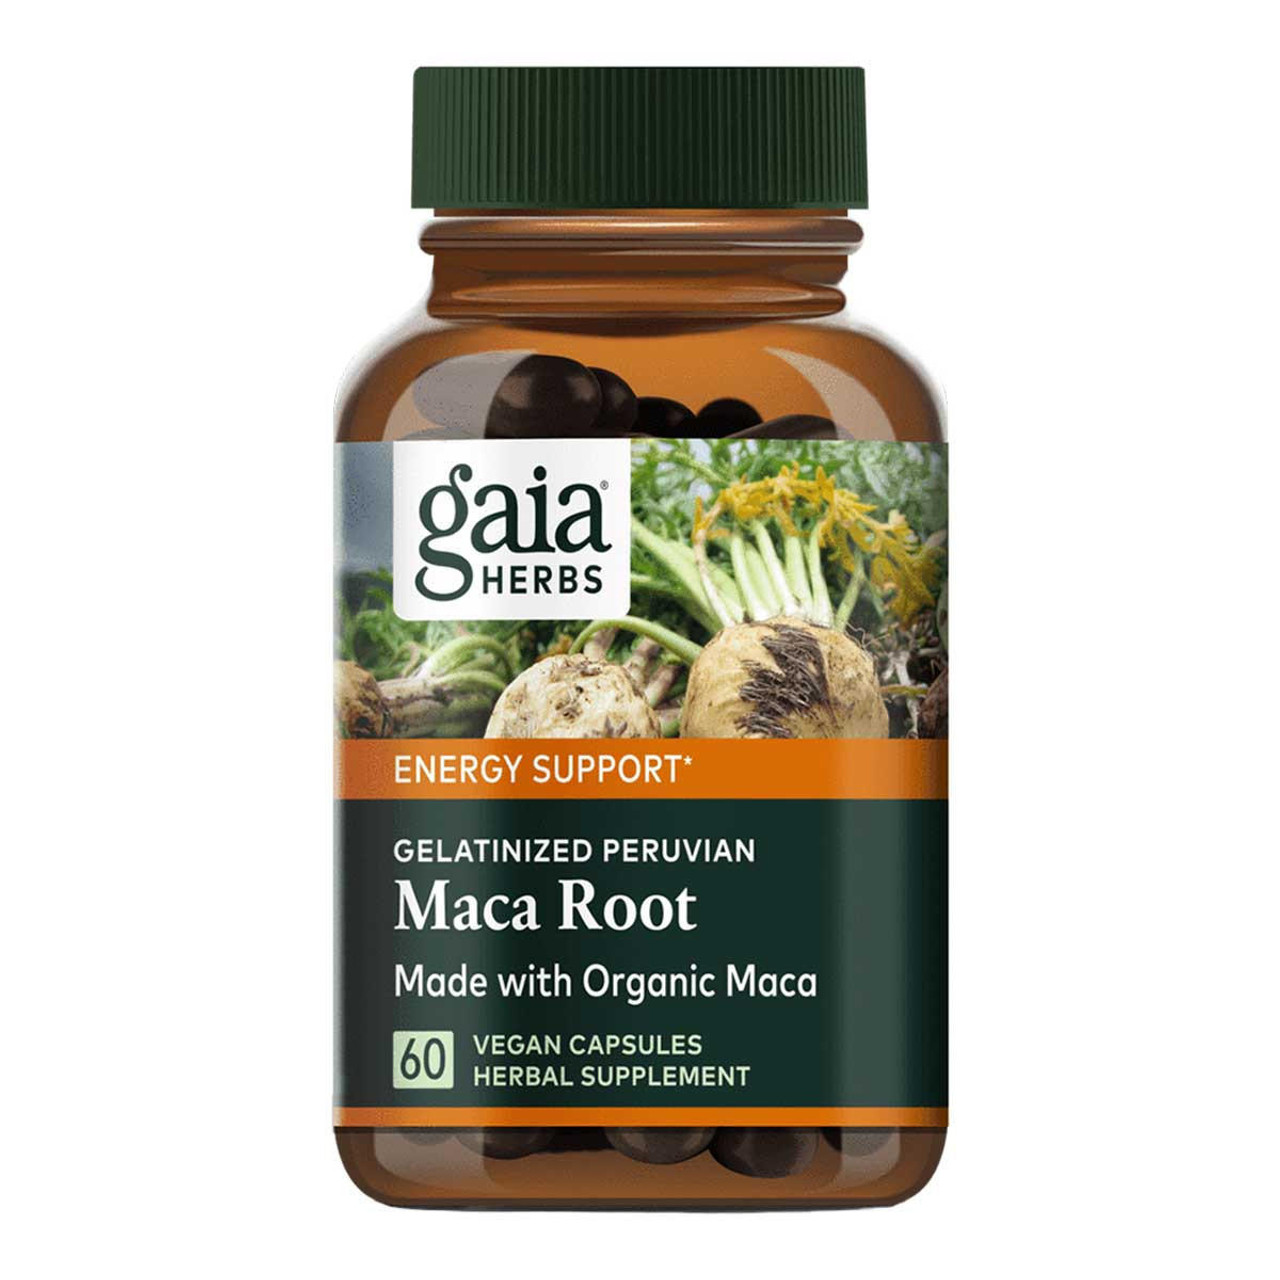 Buy Maca Root By Gaia Herbs I Healthpost Nz